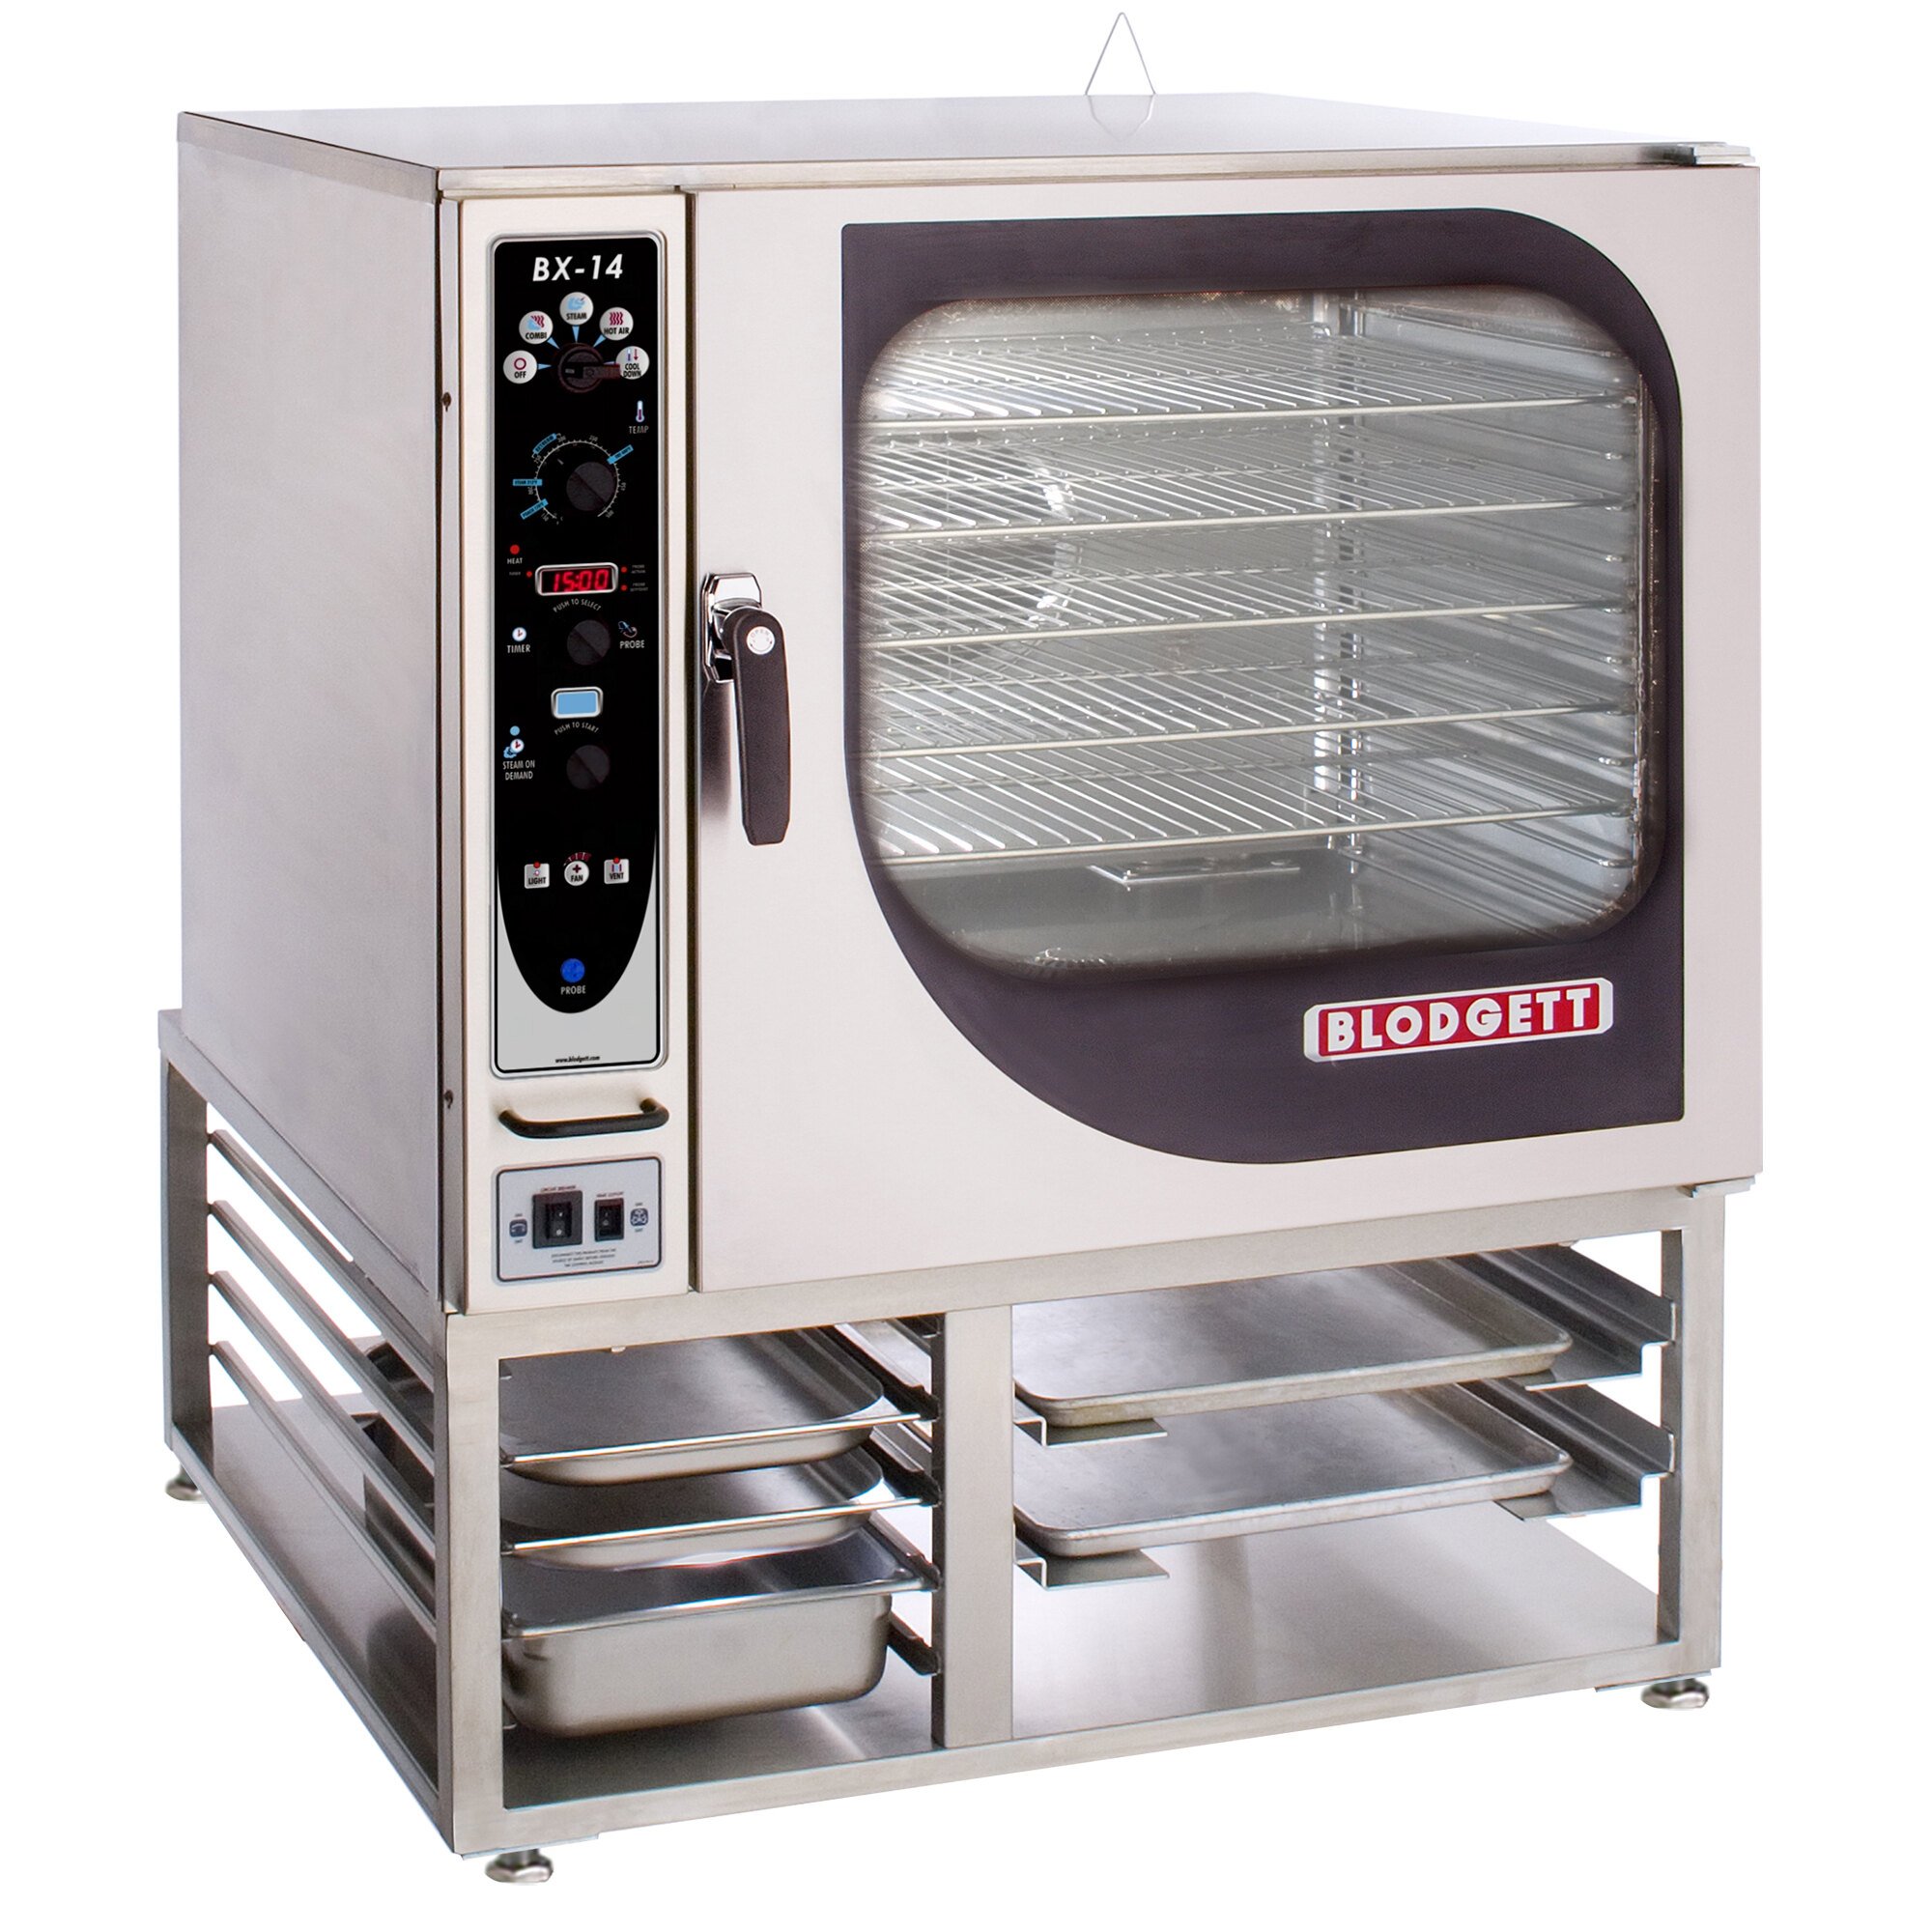 Blodgett Bx 14e 208 3 Single Full Size Boilerless Electric Combi Oven With Manual Controls